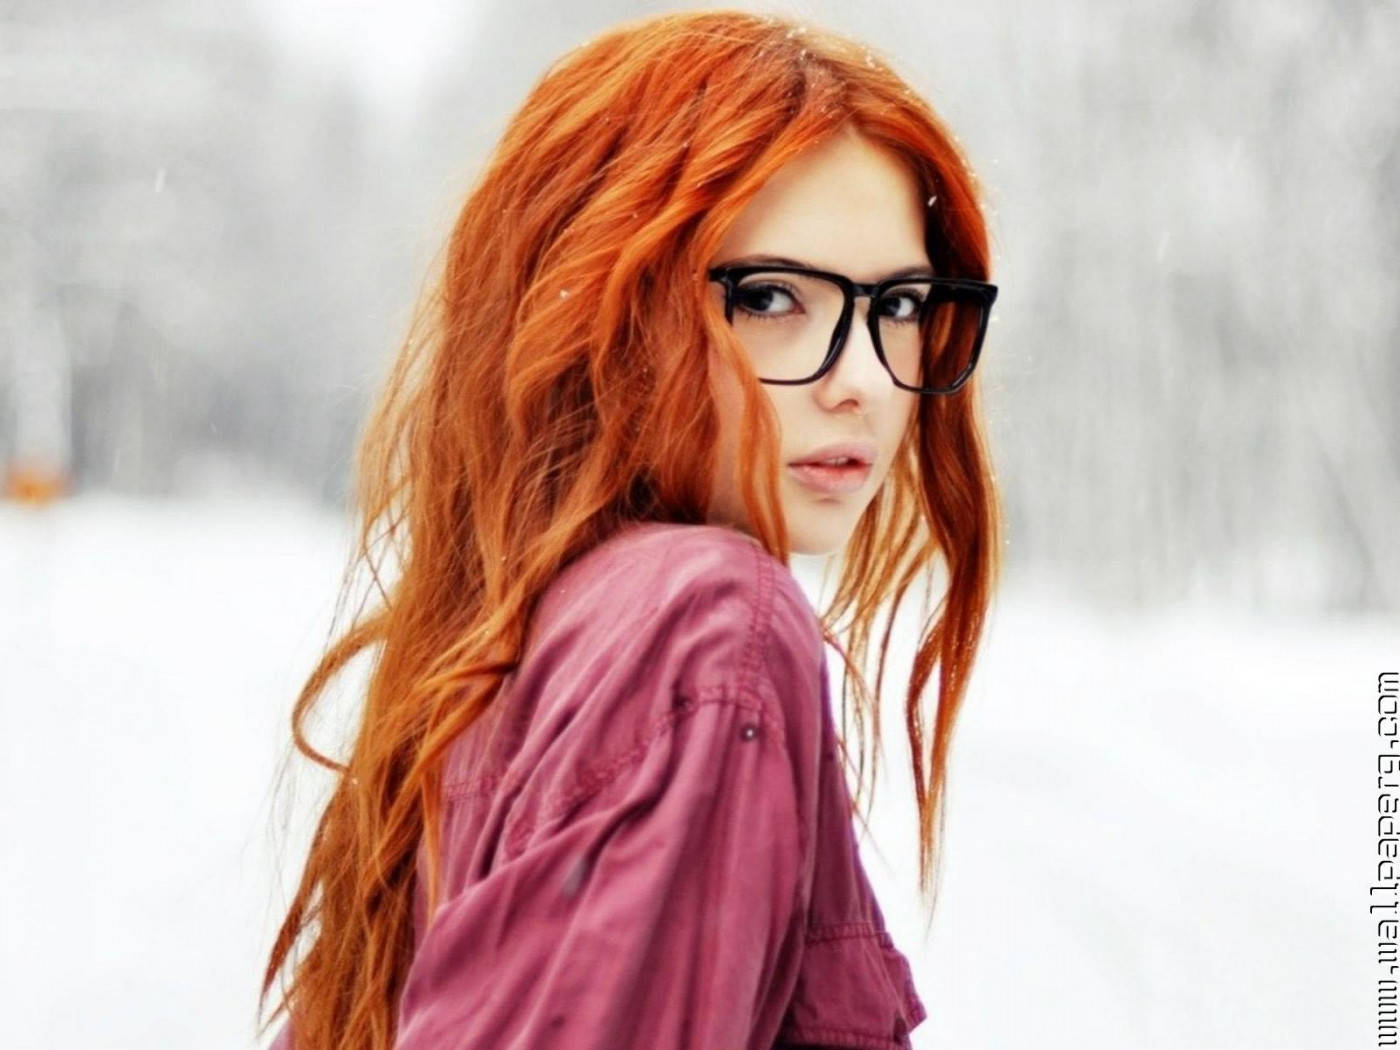 Attitude Girl With Orange Hair And Glasses Wallpaper